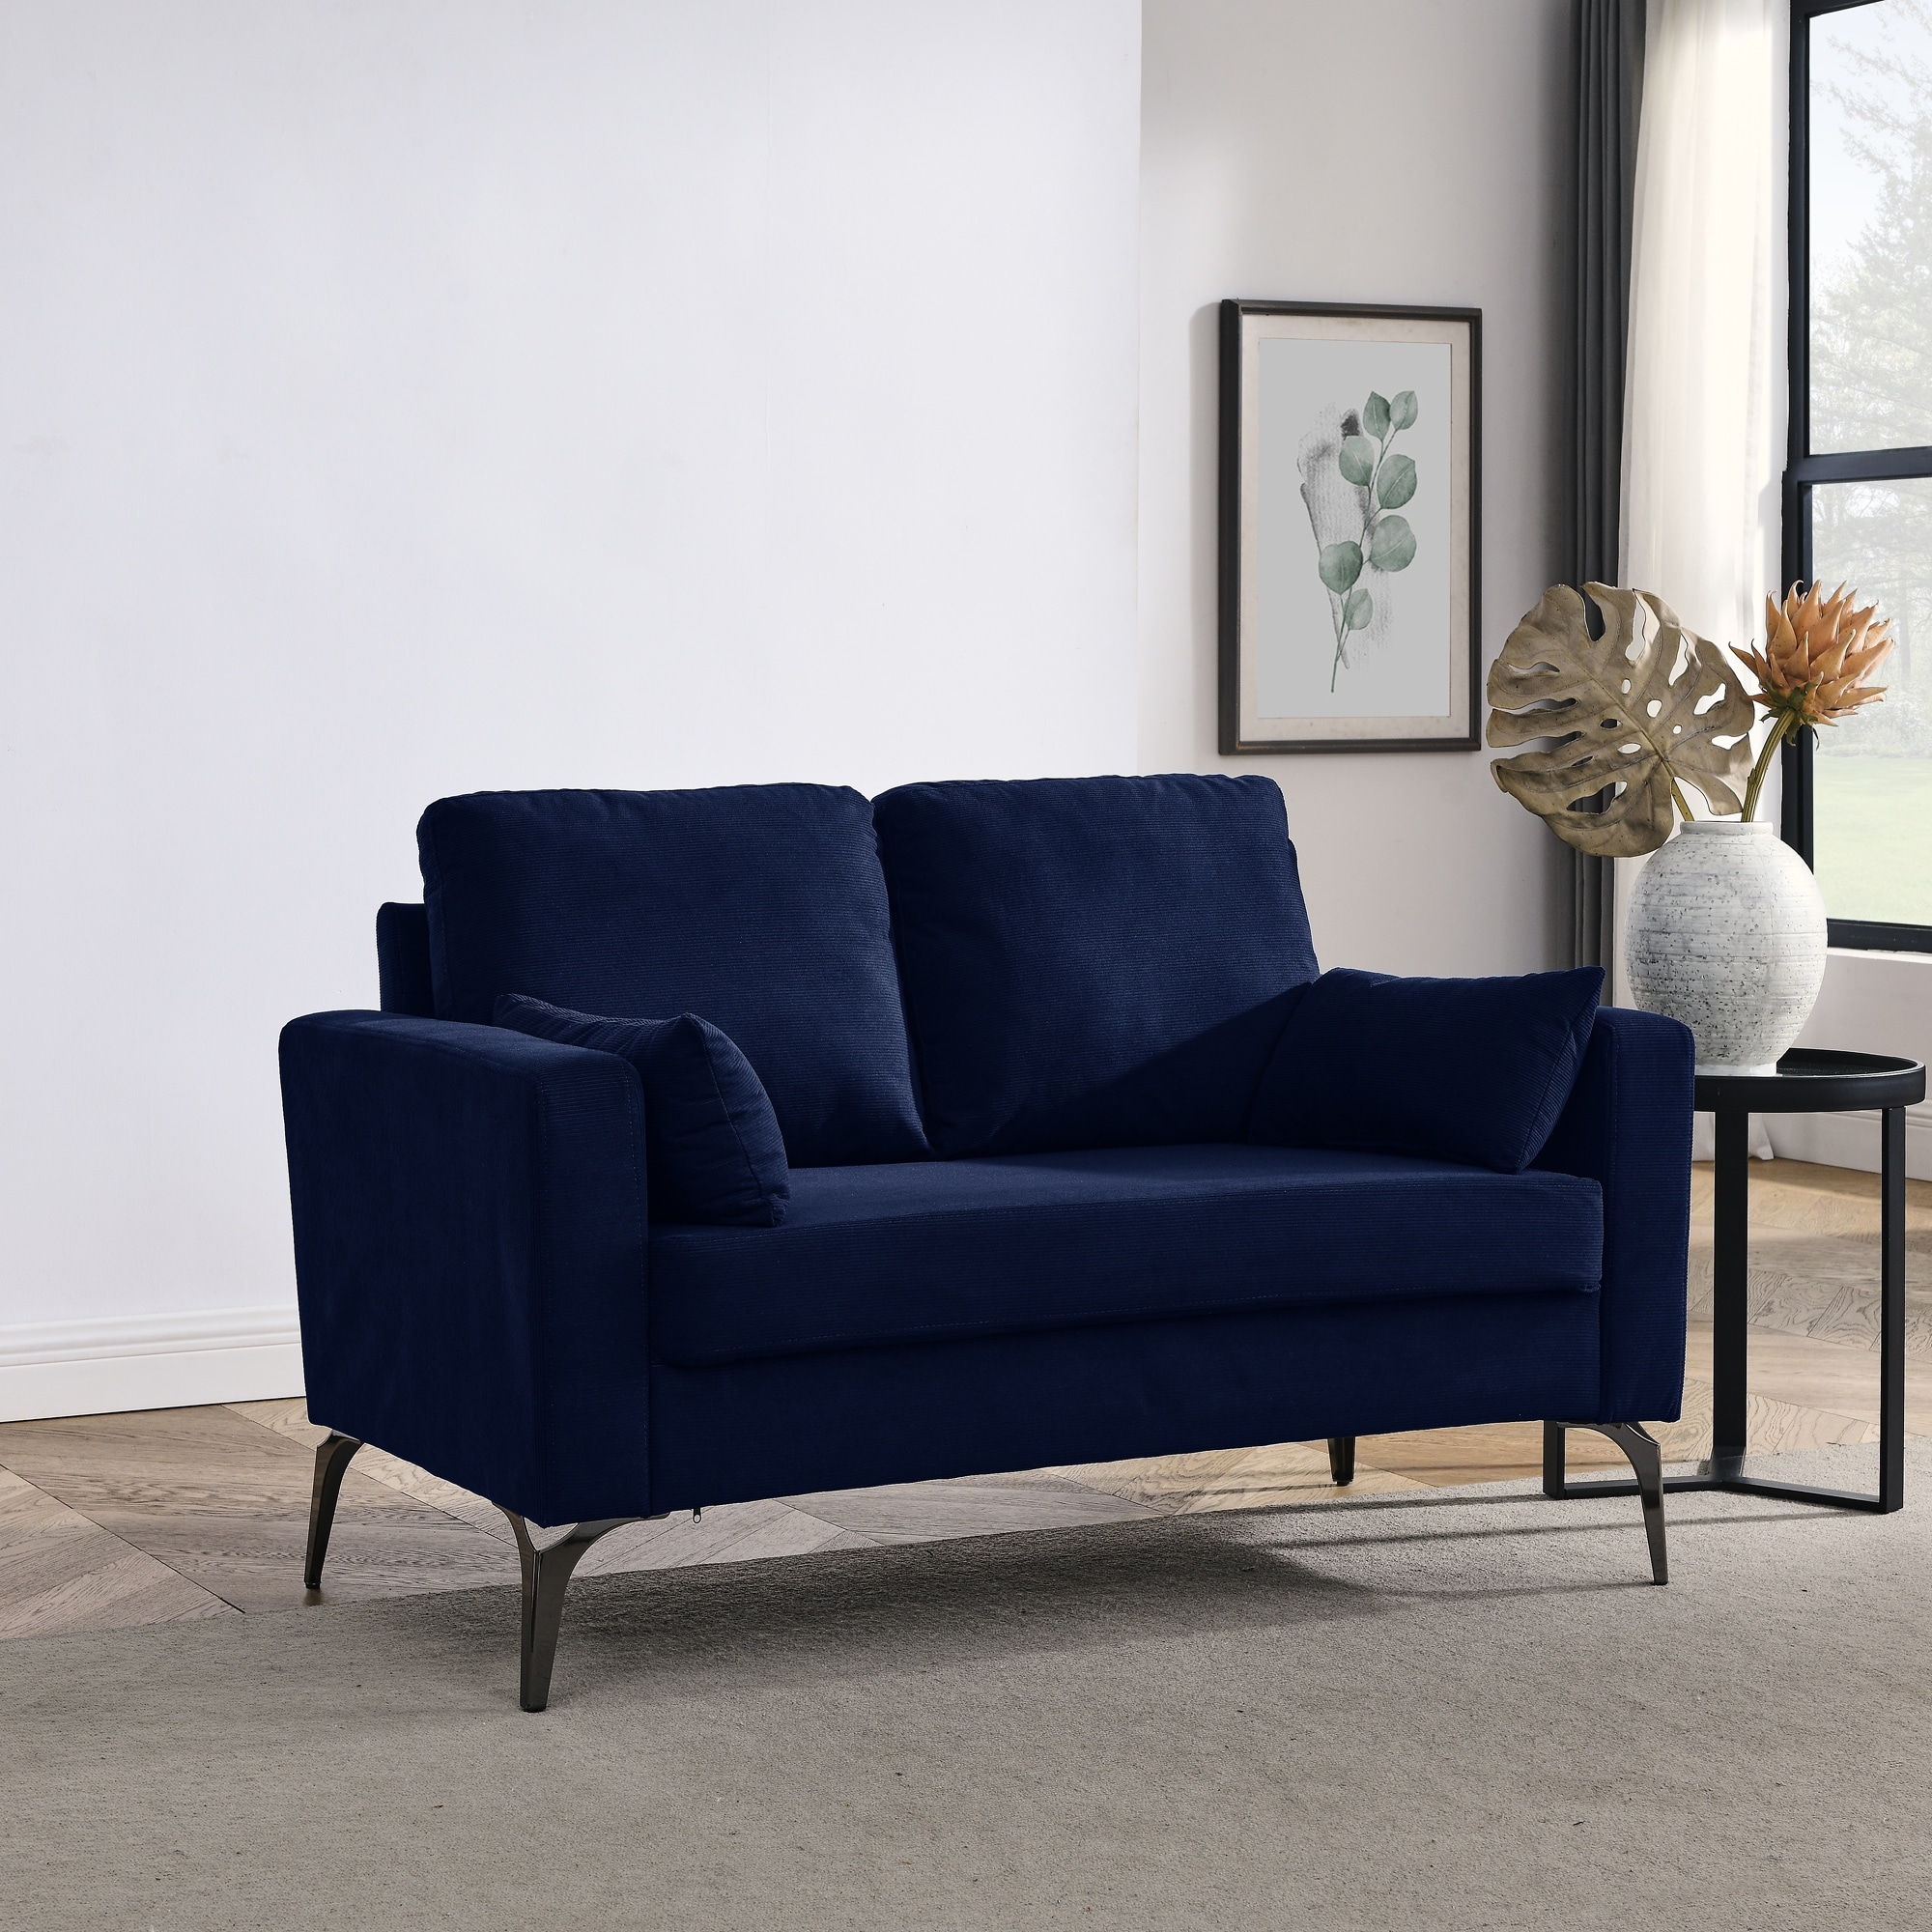 Modern Minimalist Corduroy Loveseat Sofa with Two Small Pillows - Bed Bath  & Beyond - 39595799